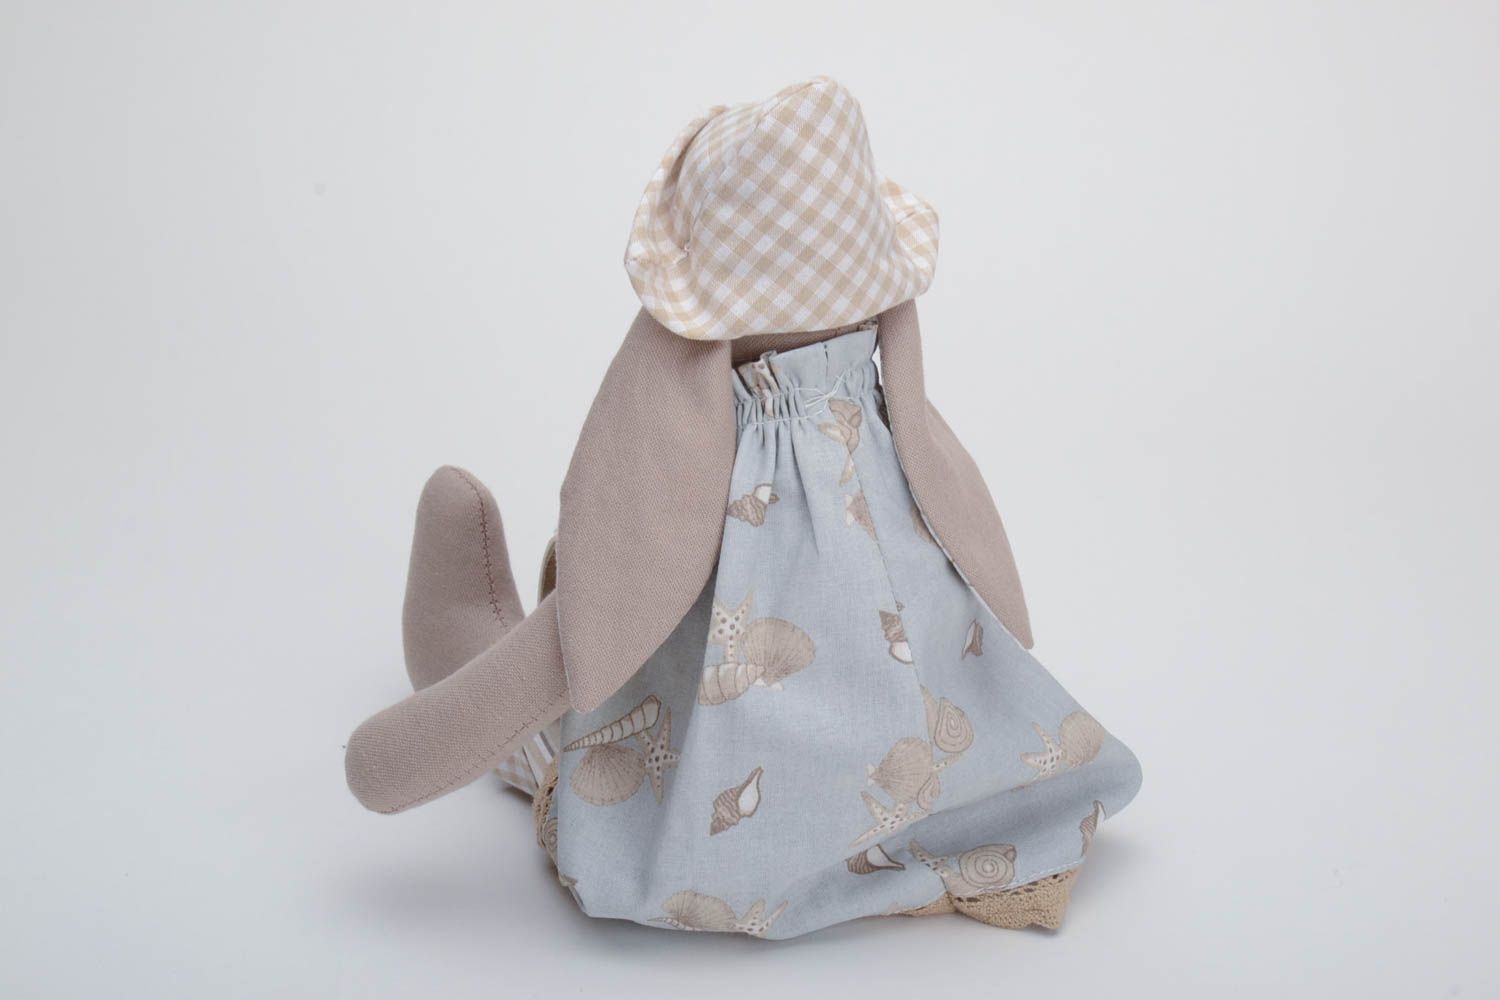 Handmade soft toy sewn of cotton fabric rabbit with long ears in hat and dress photo 4